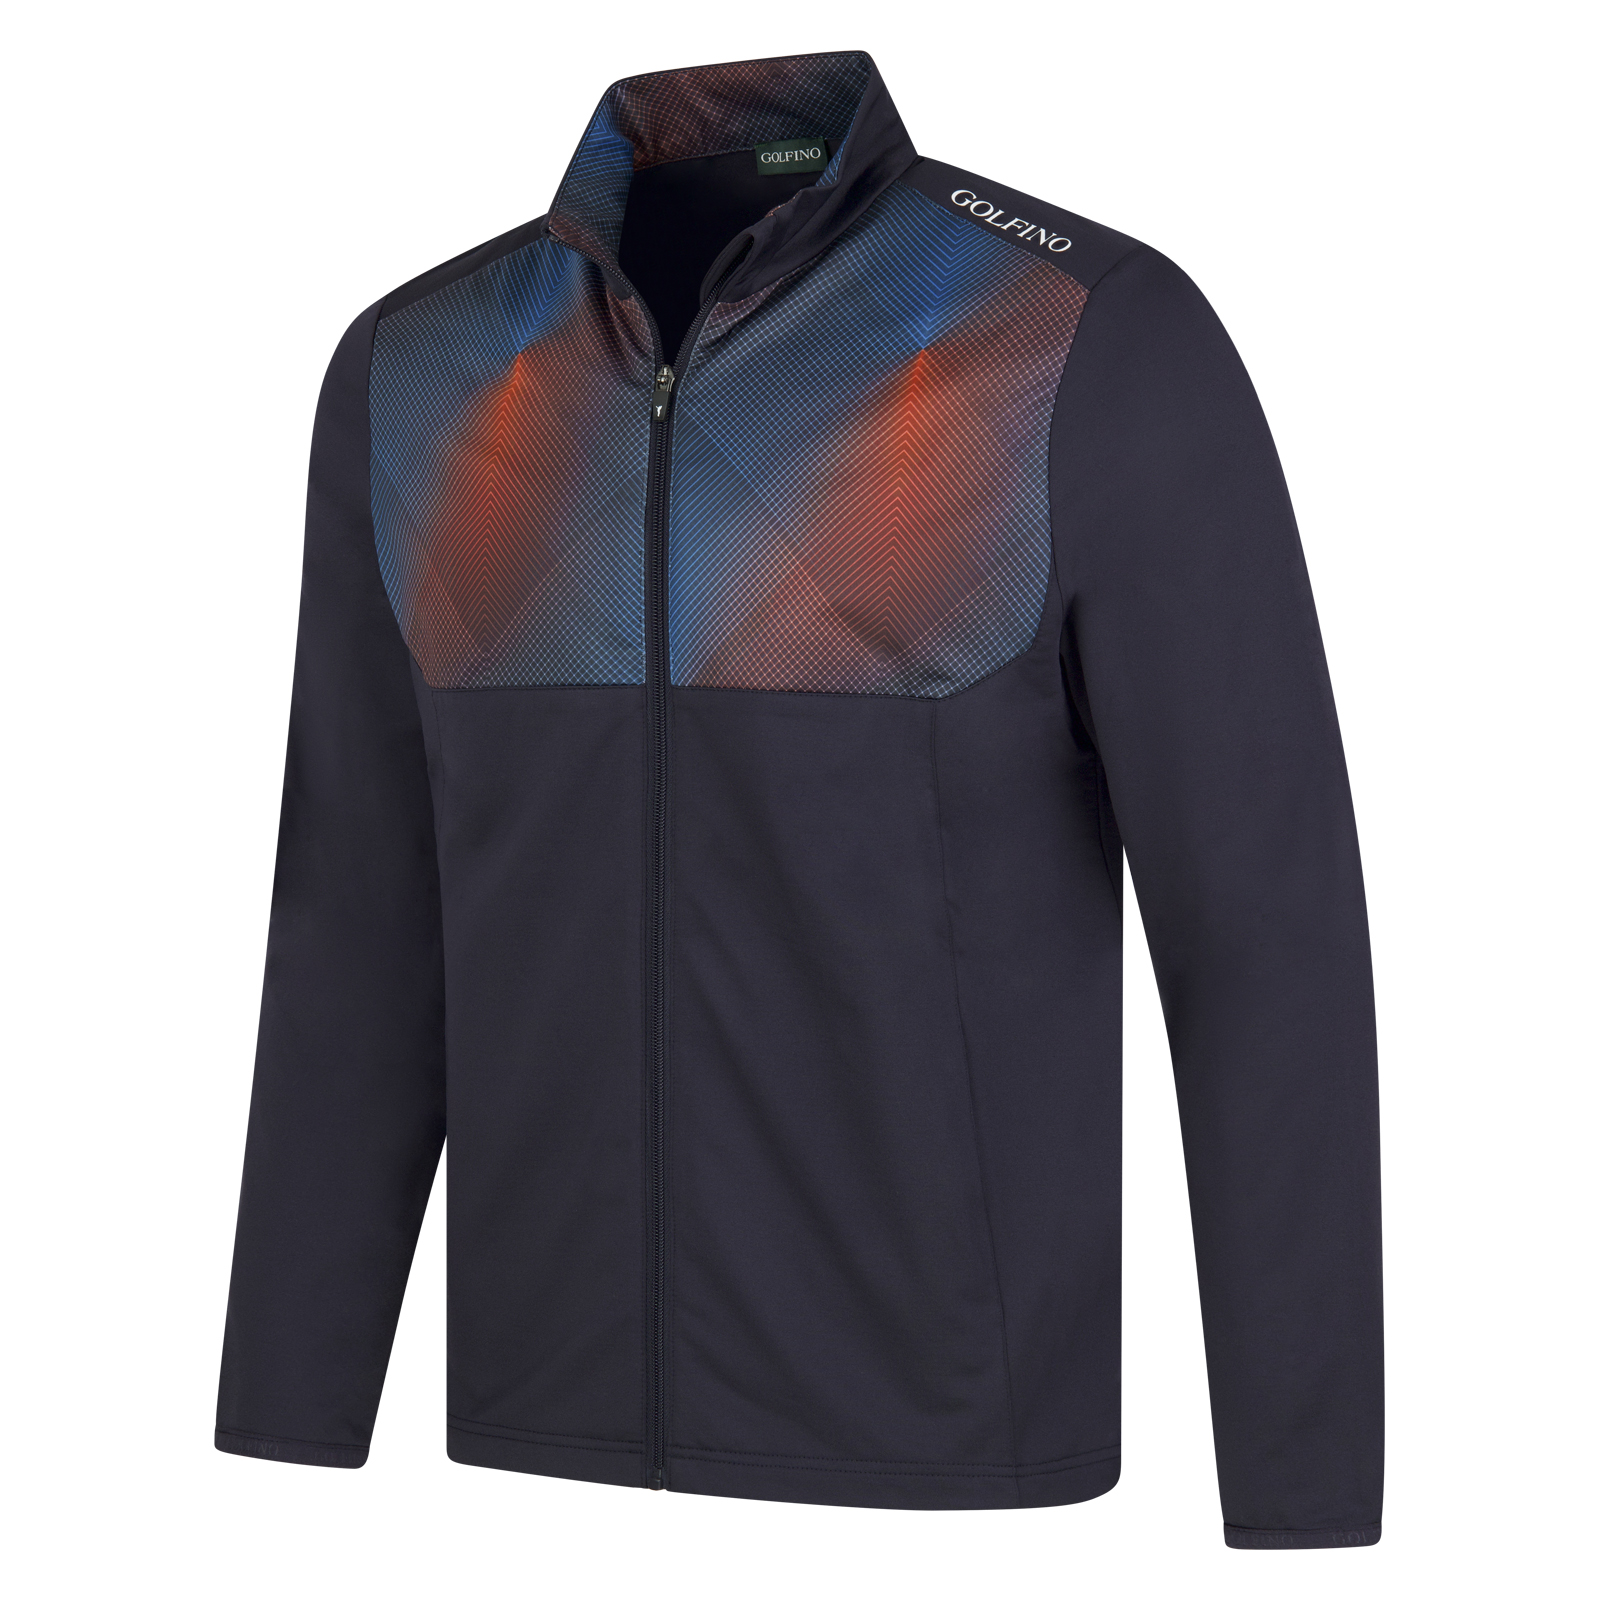 Men's stretch golf jacket with two-tone print